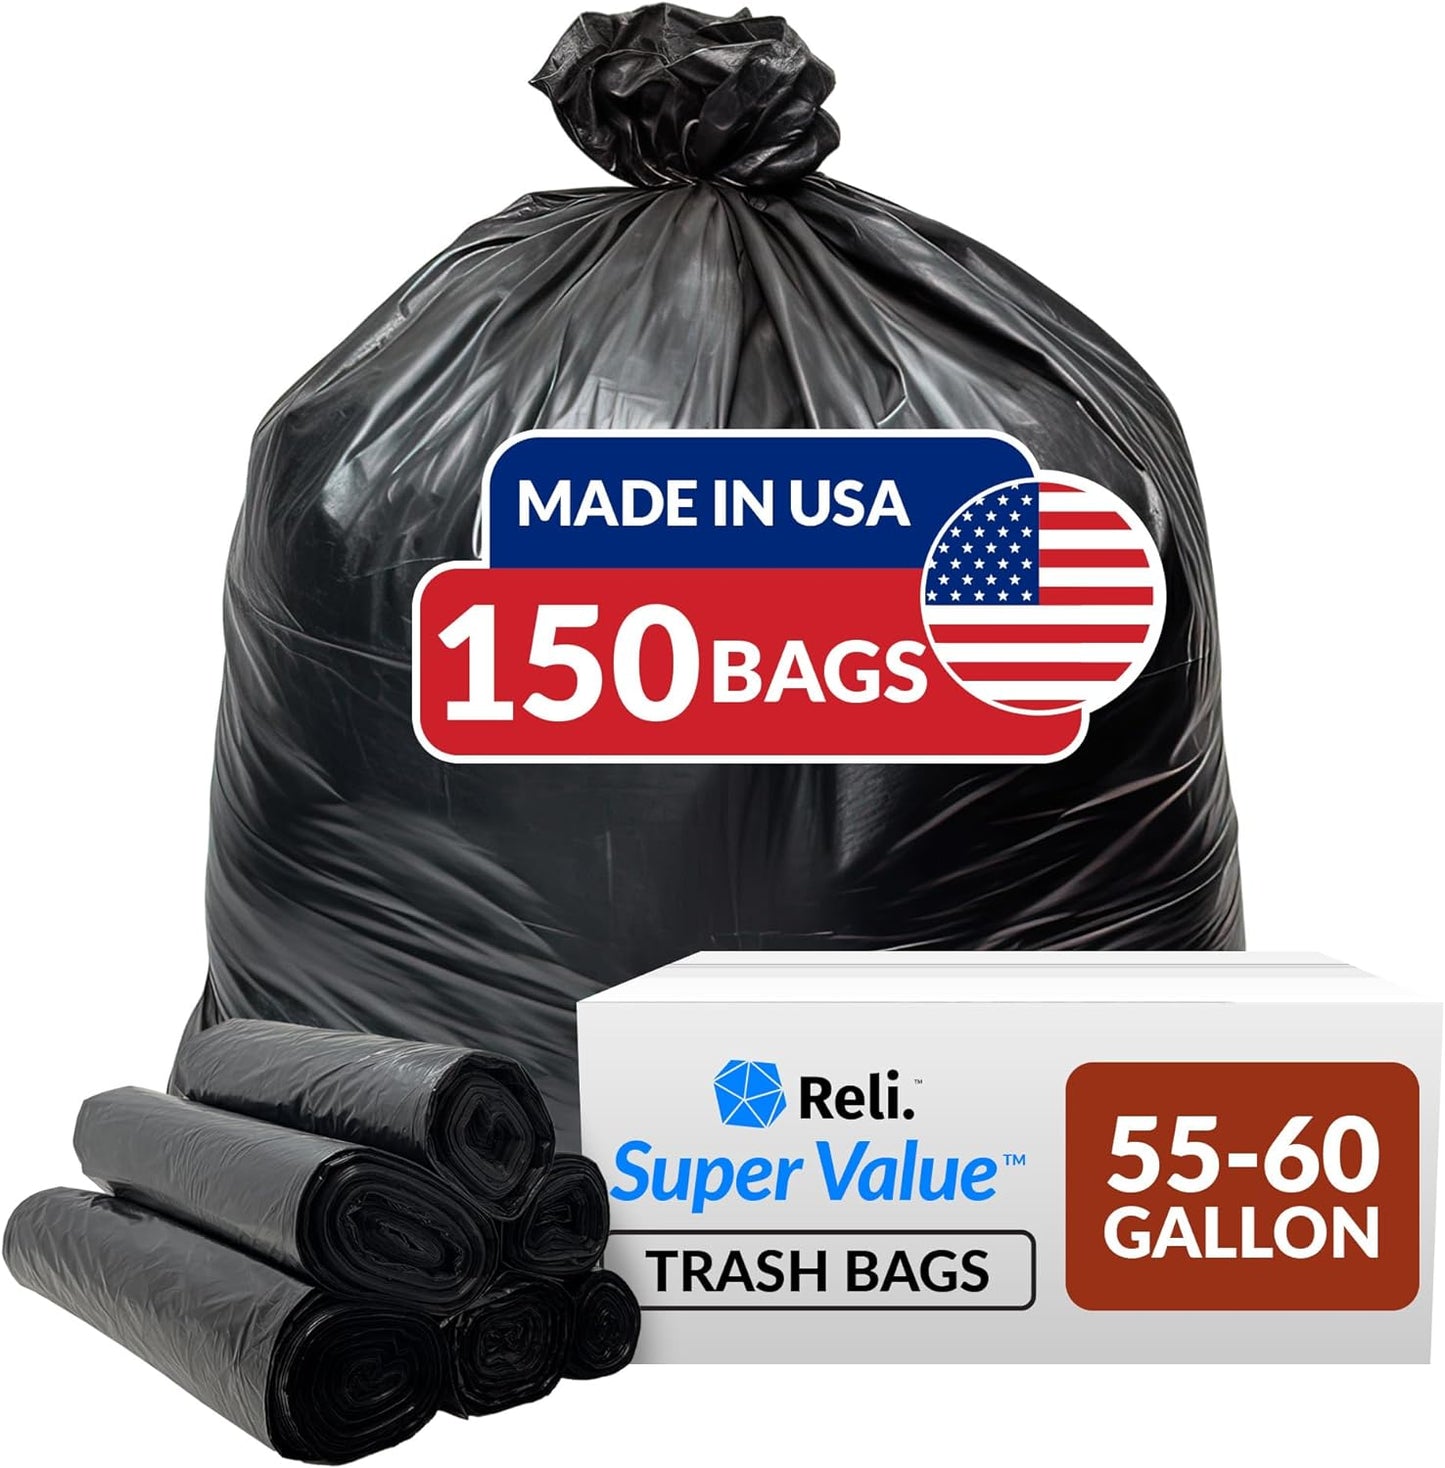 Uniites™ Reli. 55-60 Gallon Trash Bags Heavy Duty | 150 Bags | 50-60 Gallon | Large Black Garbage Bags | Made in USA $48.91